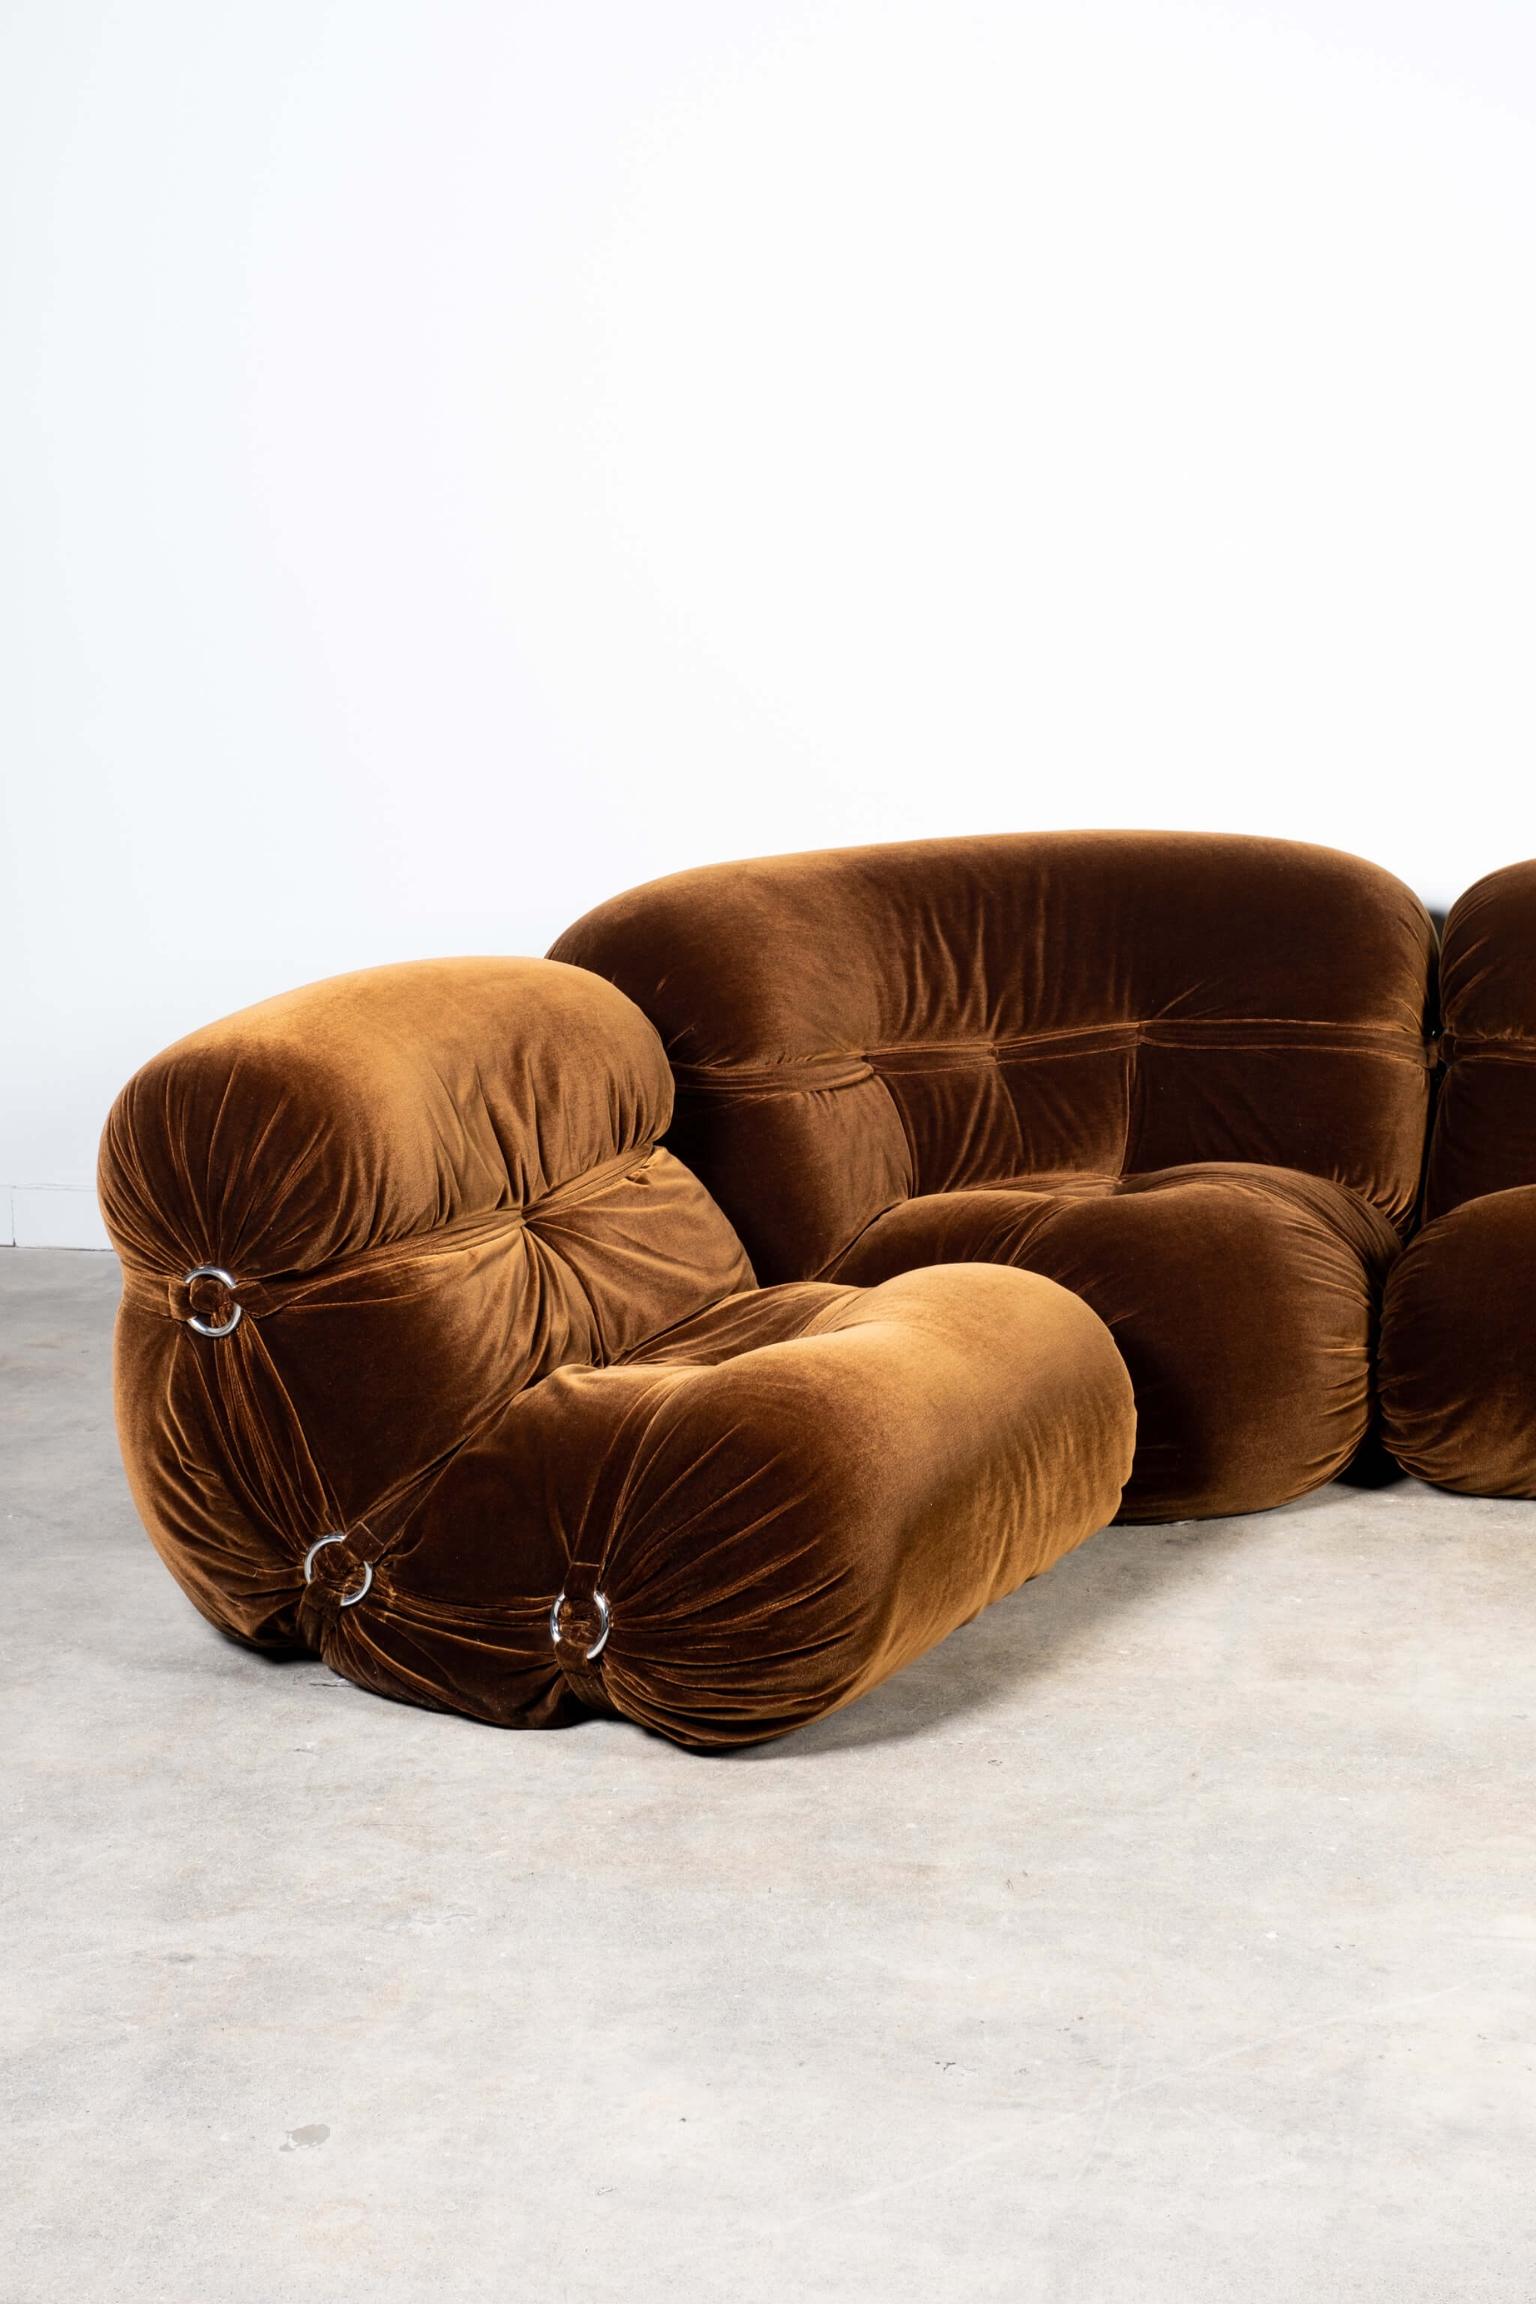 Configure this impressive piece as you wish. The sofa sections can be used separately or together, lending a flexibility to your design. The backs and armrests are attached with rings and carabiners.
Mint condition, in its original cinnamon velvet,